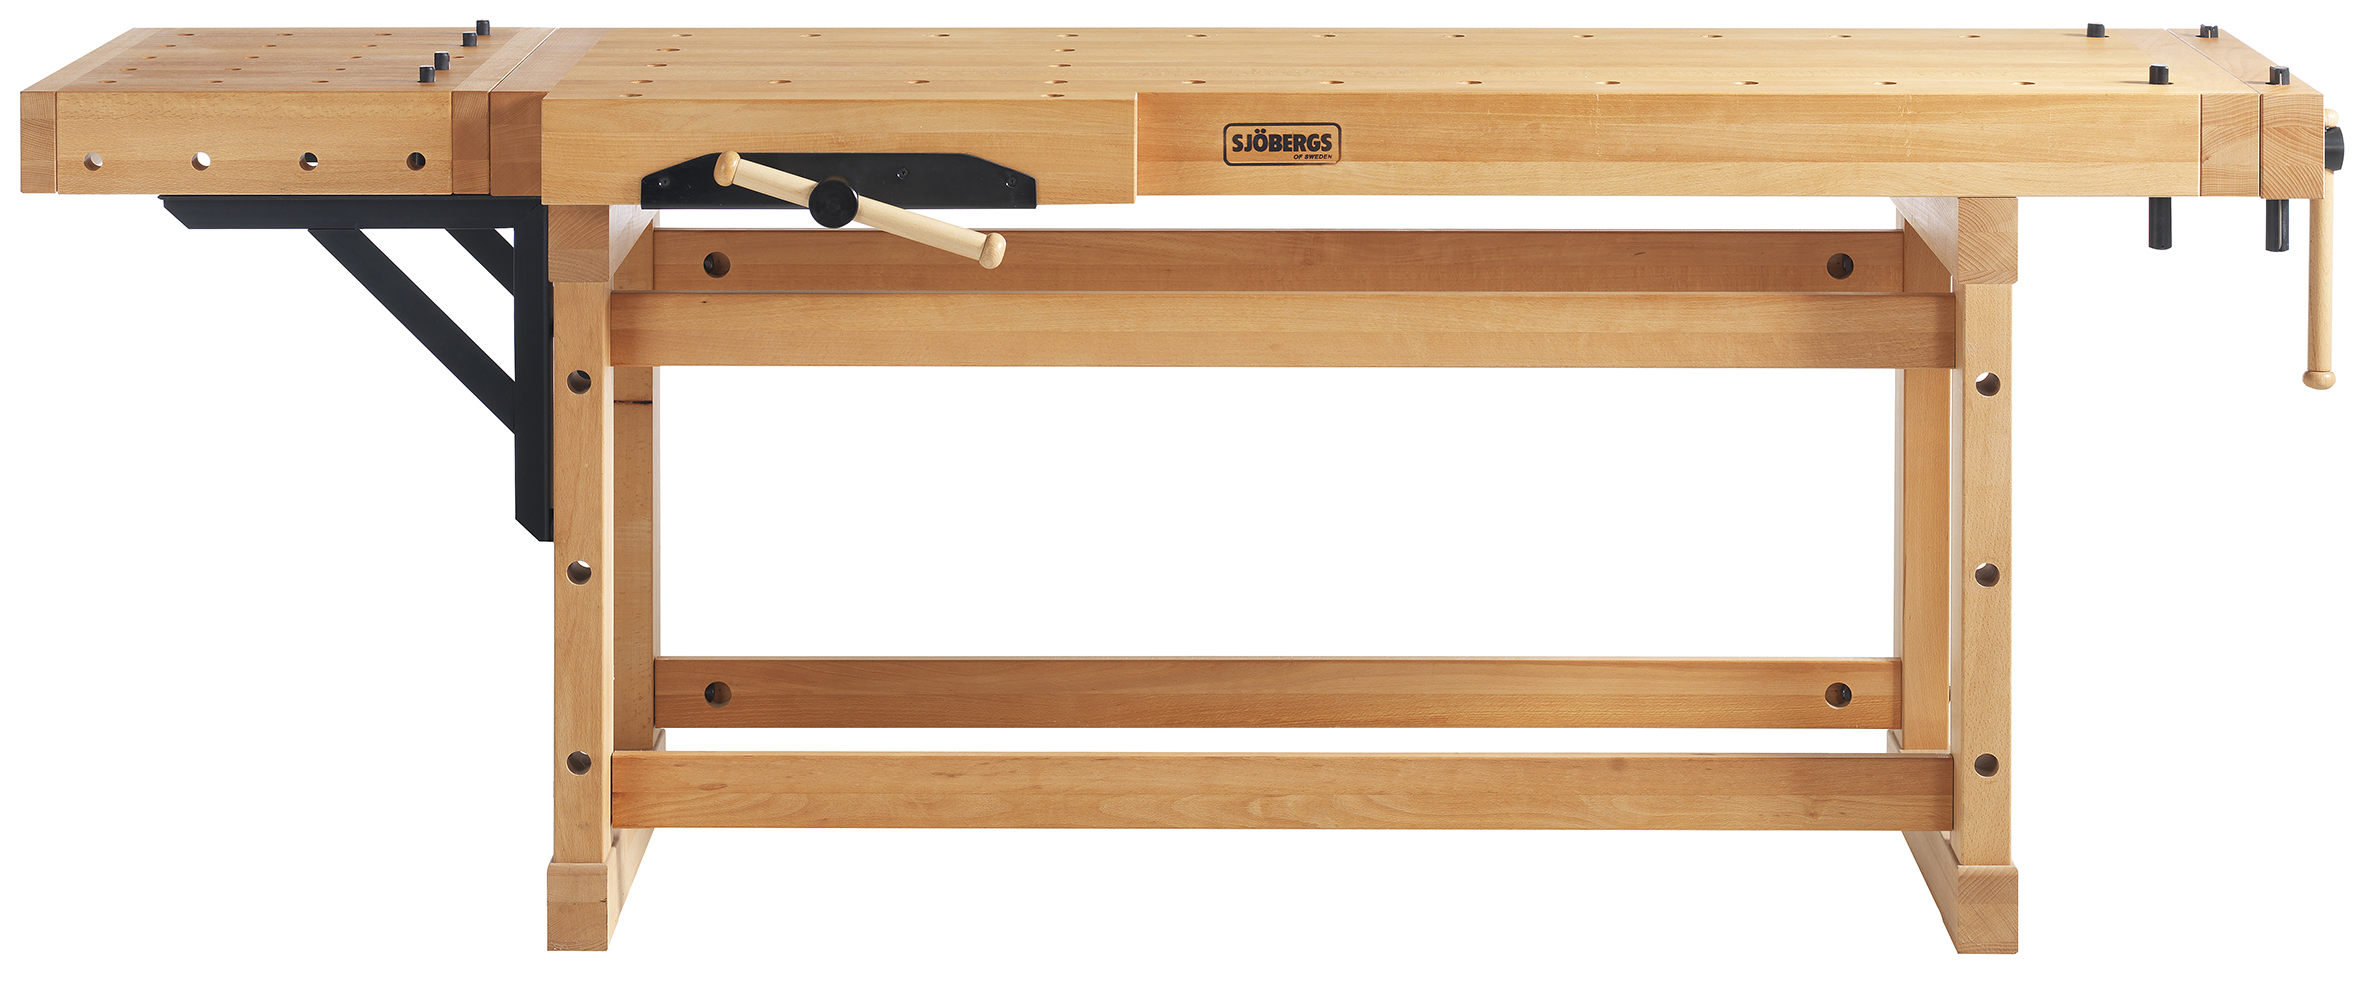 Combined workbench, clamping platform Woodworking Network